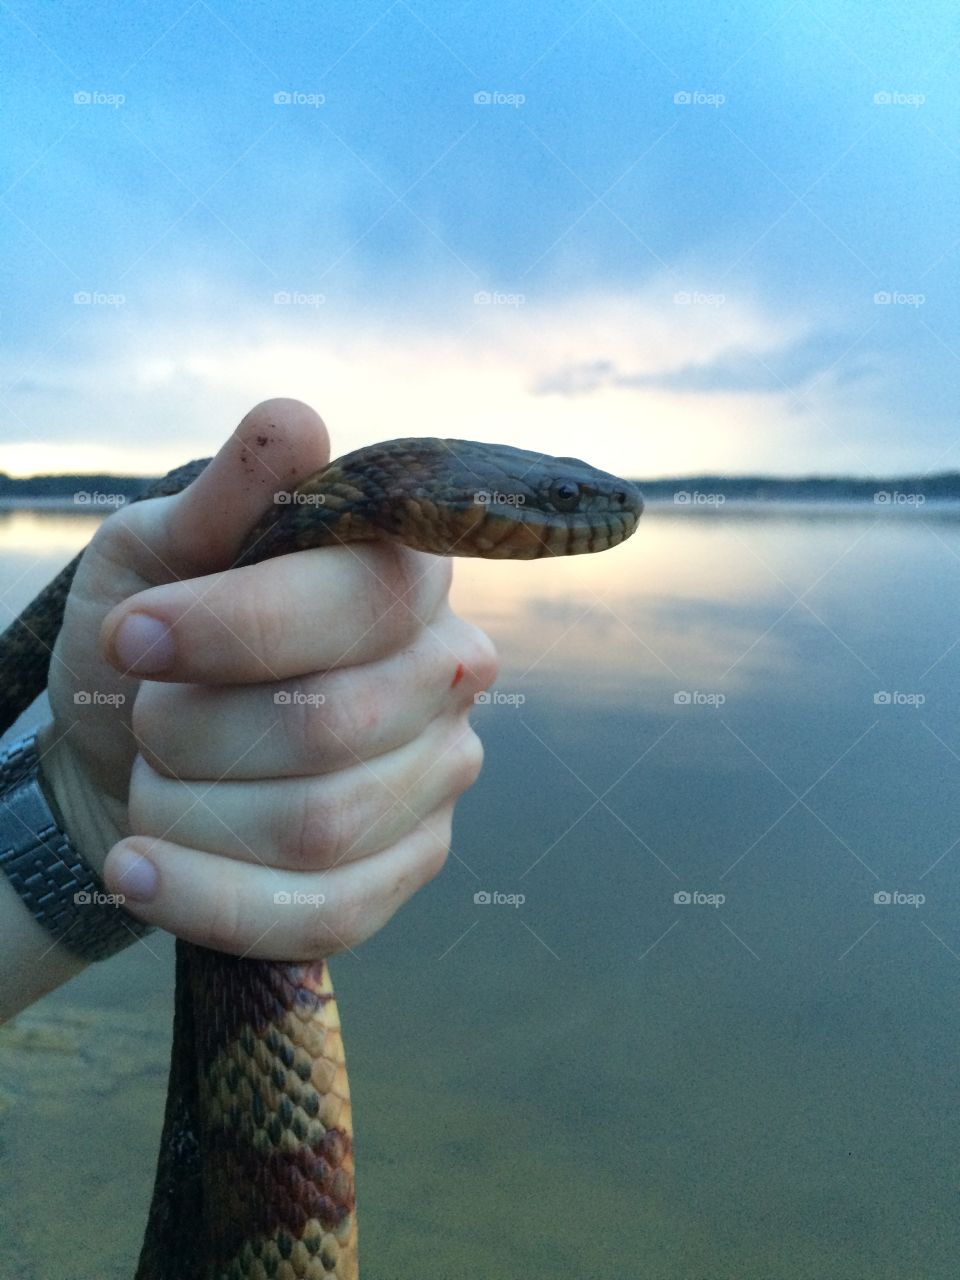 Nature, Water, Outdoors, Snake, Reptile